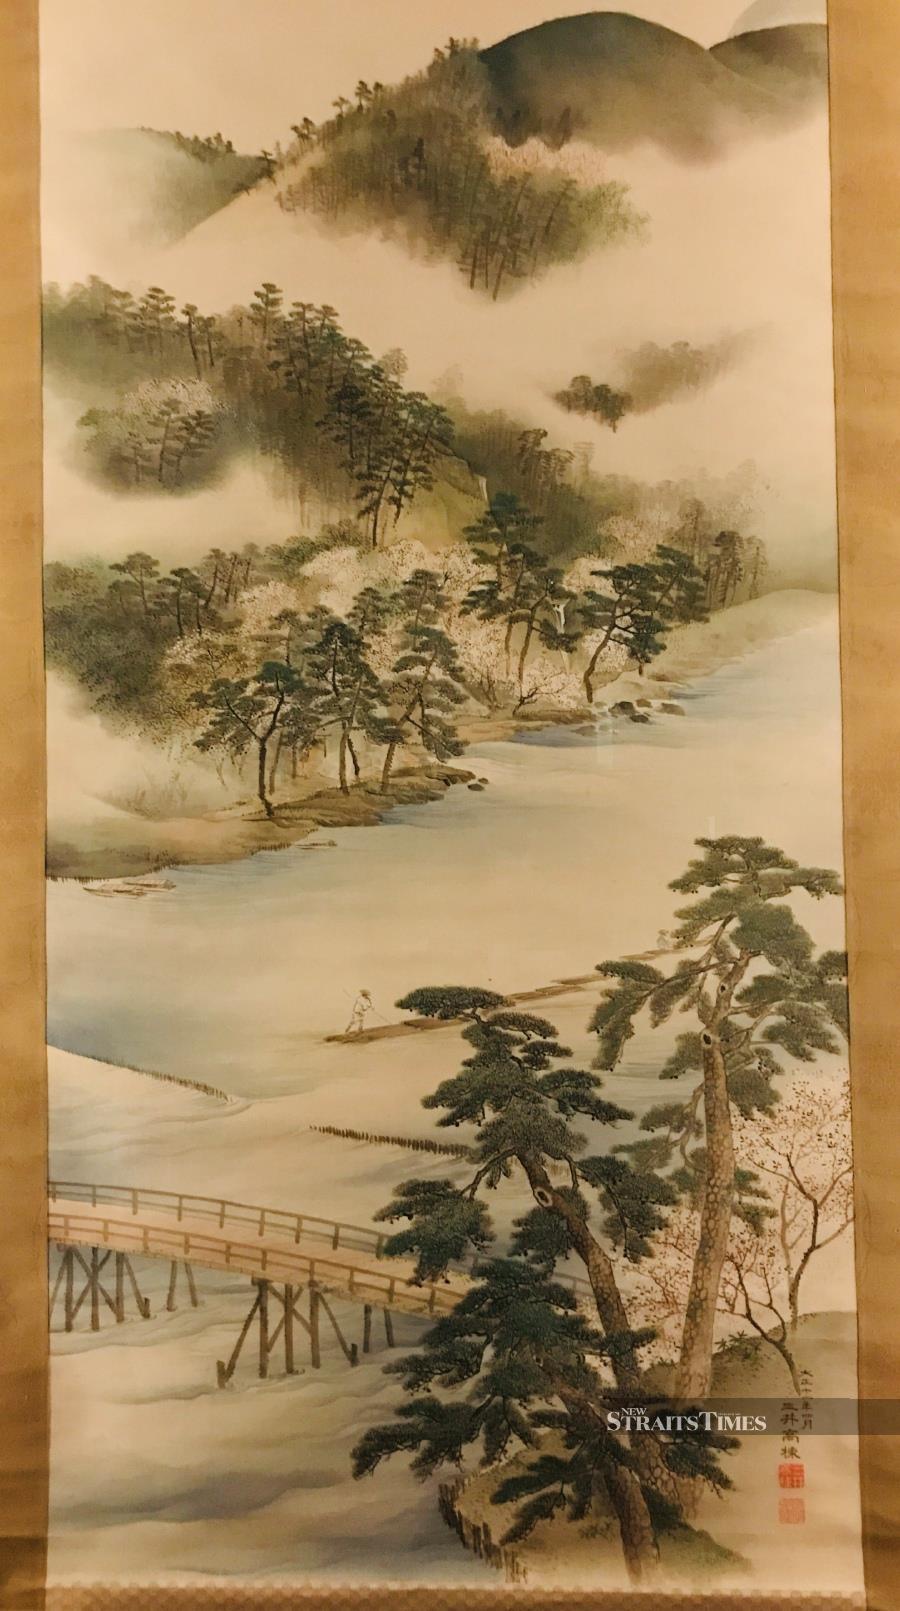  A scroll painting given to the future King Edward VIII by the artist Mitsui Takamine.